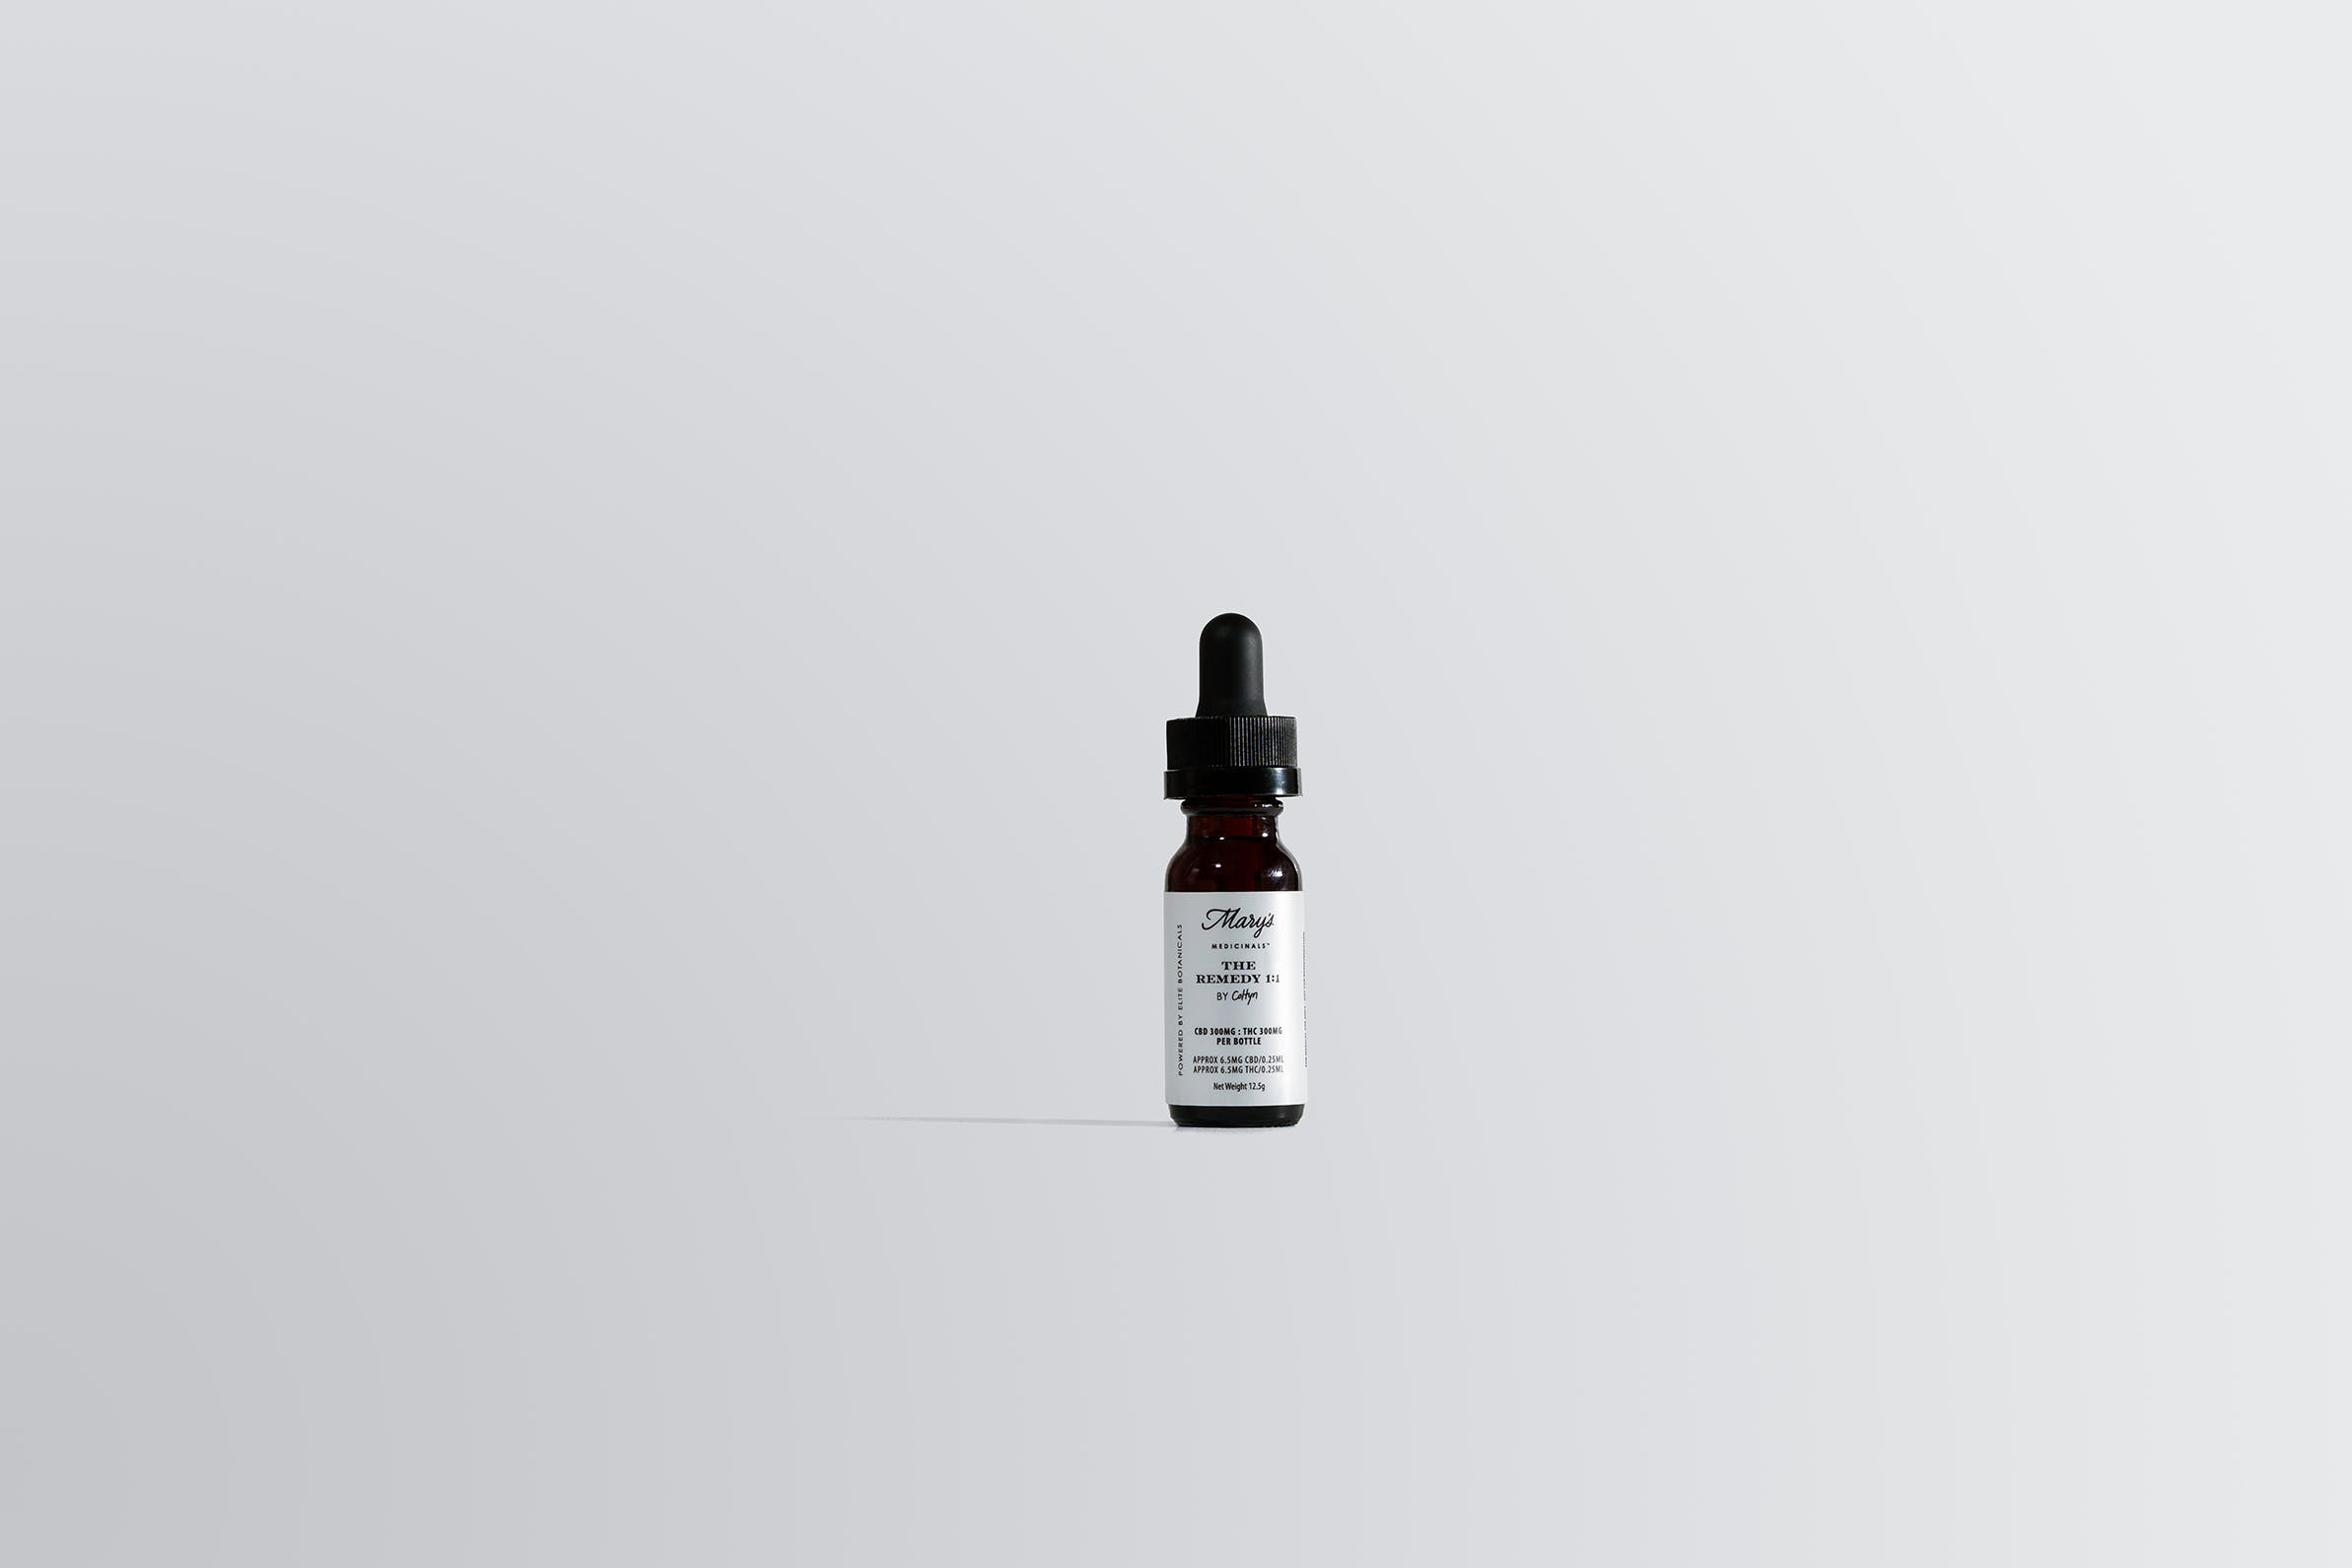 Mary's Medicinals - The Remedy CBD Tincture